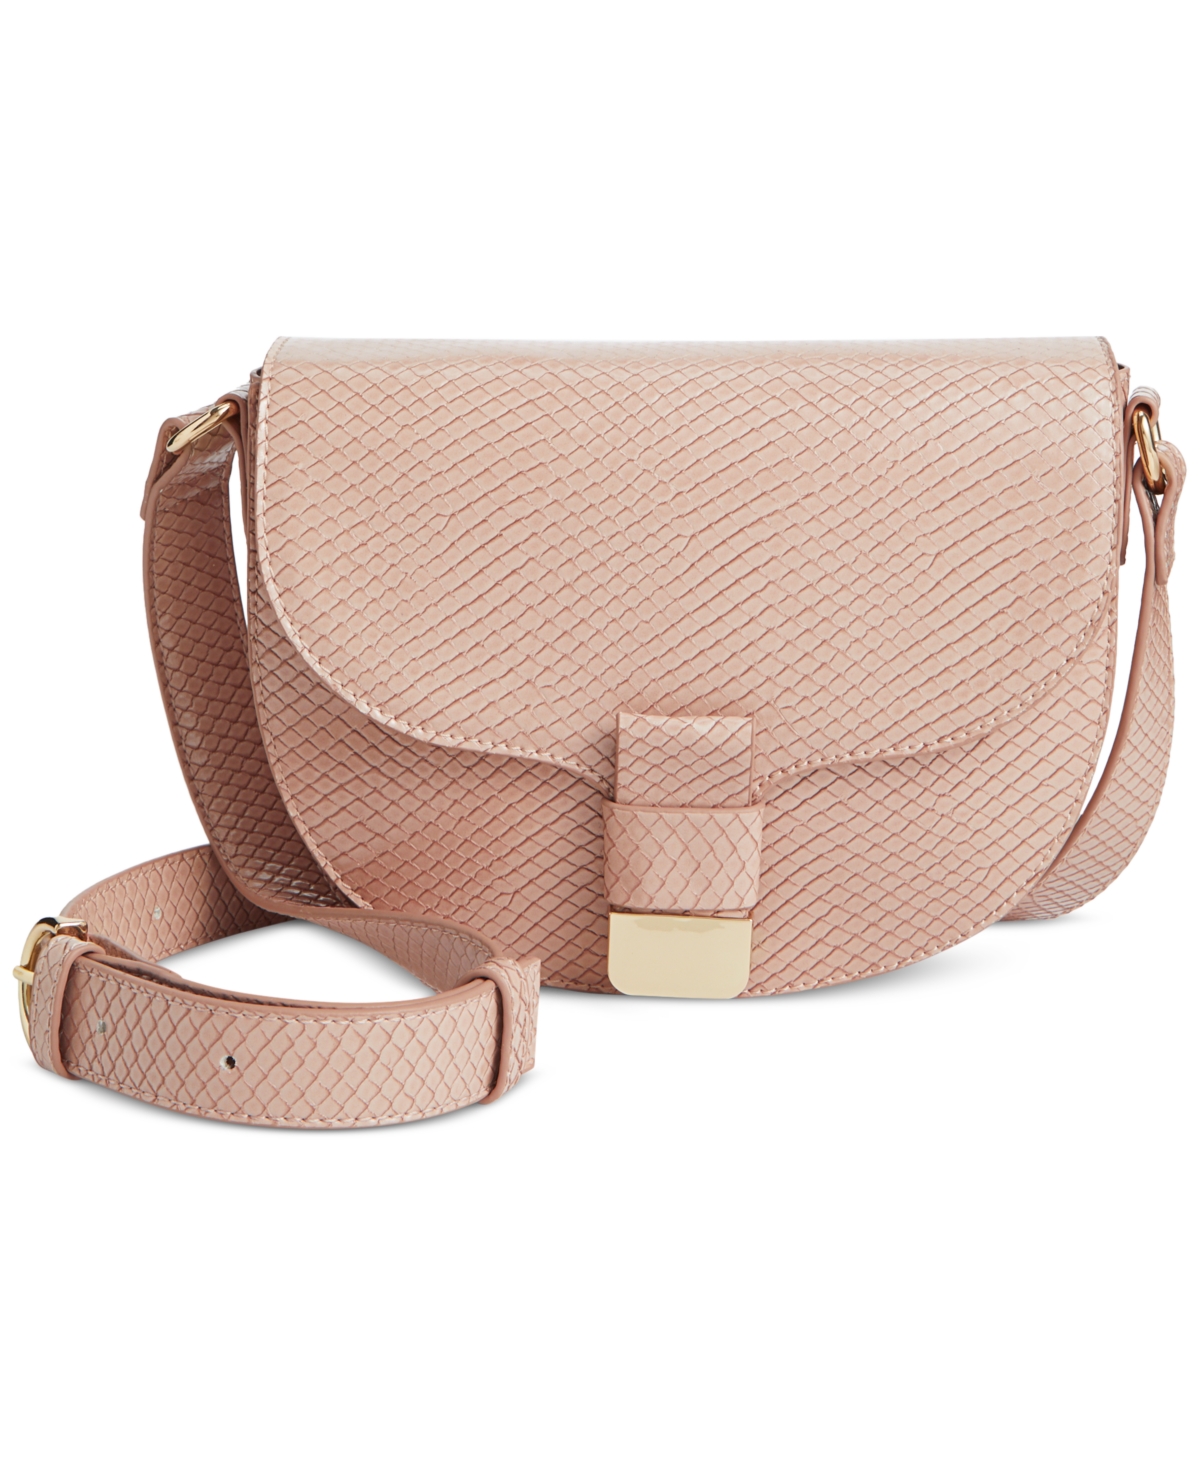 Holmme Embossed Crossbody Bag, Created for Macy's - Peony Snake